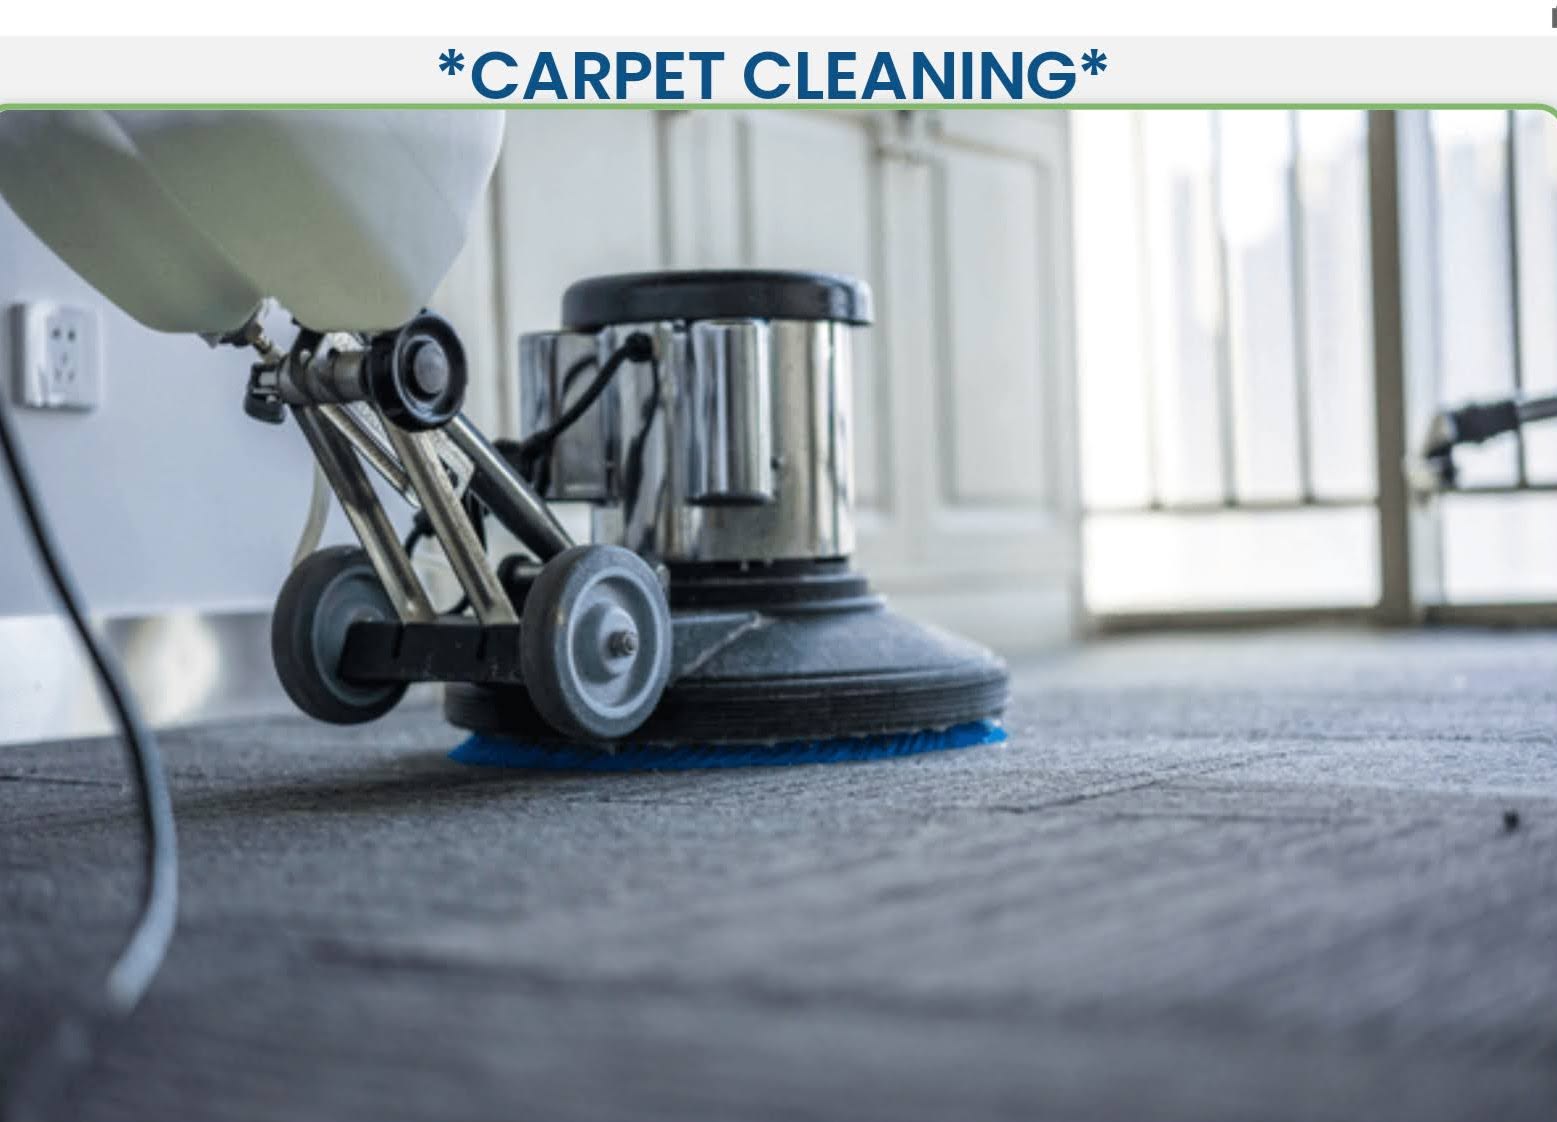 Carpet Cleaning Professional Cleaners Satisfied System